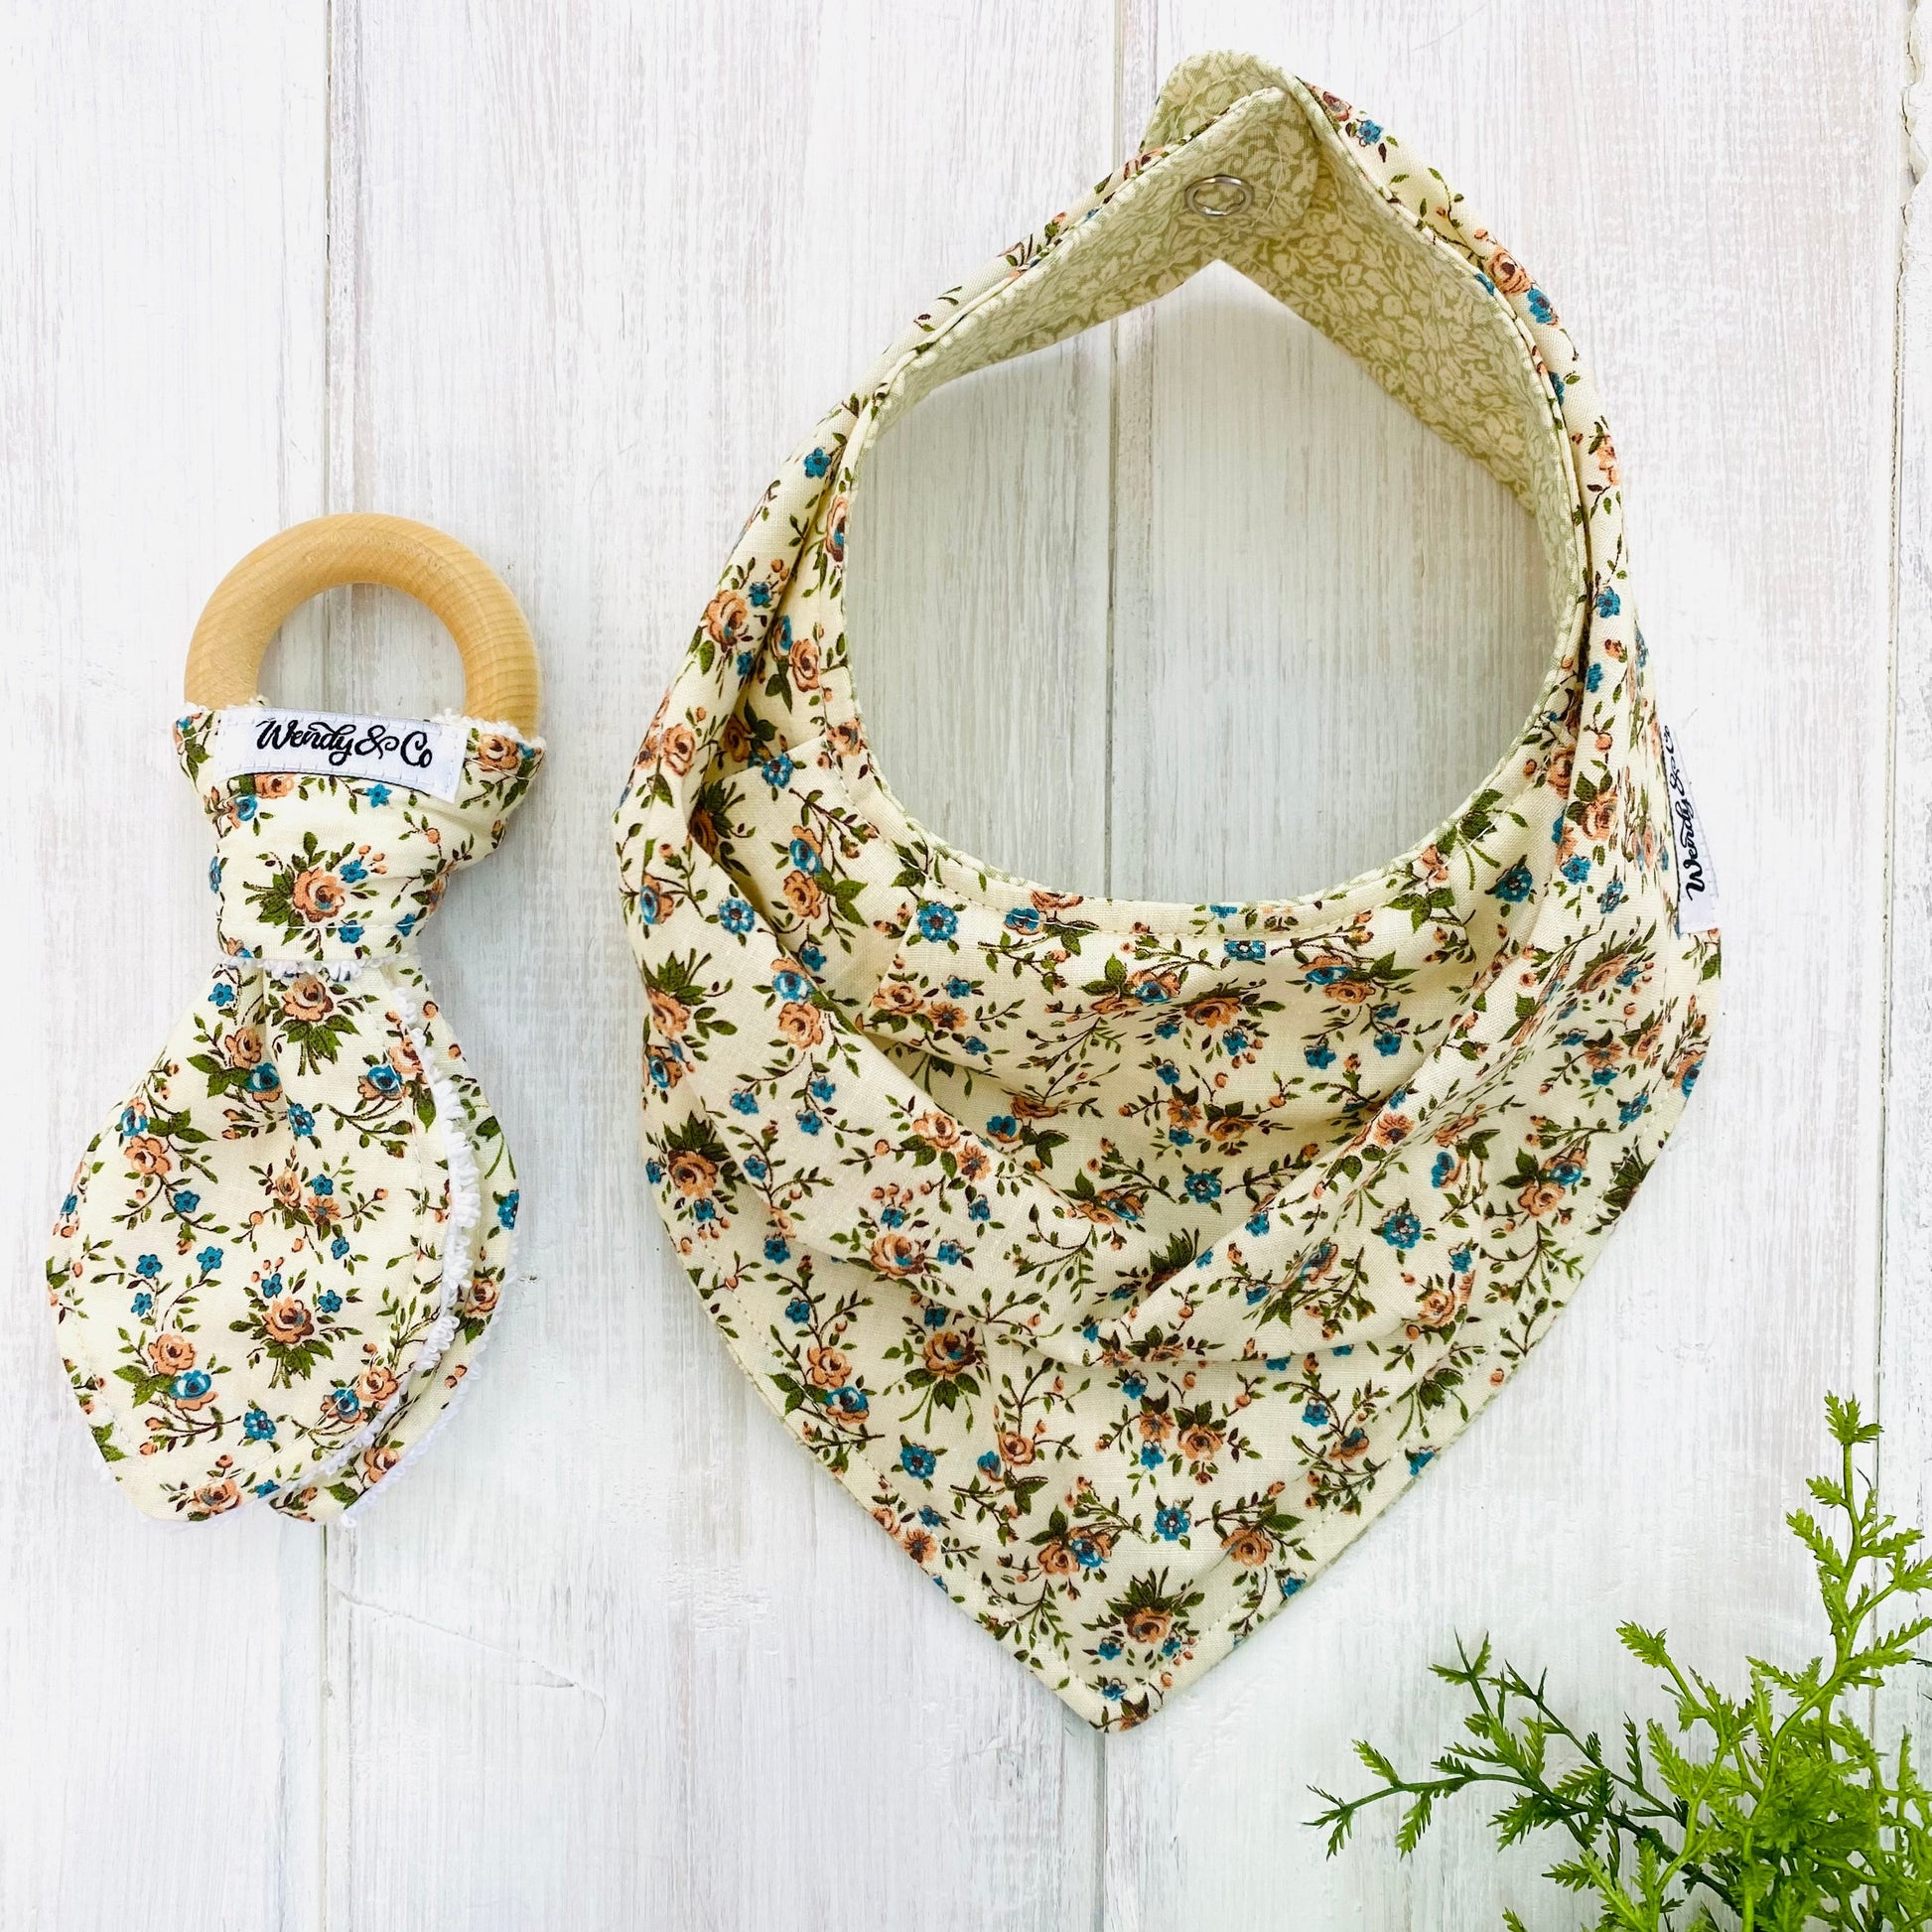 wood and fabric bunny ear teether  and baby bandana bib in vintage floral with rust, blue and olive flowers on cream background.